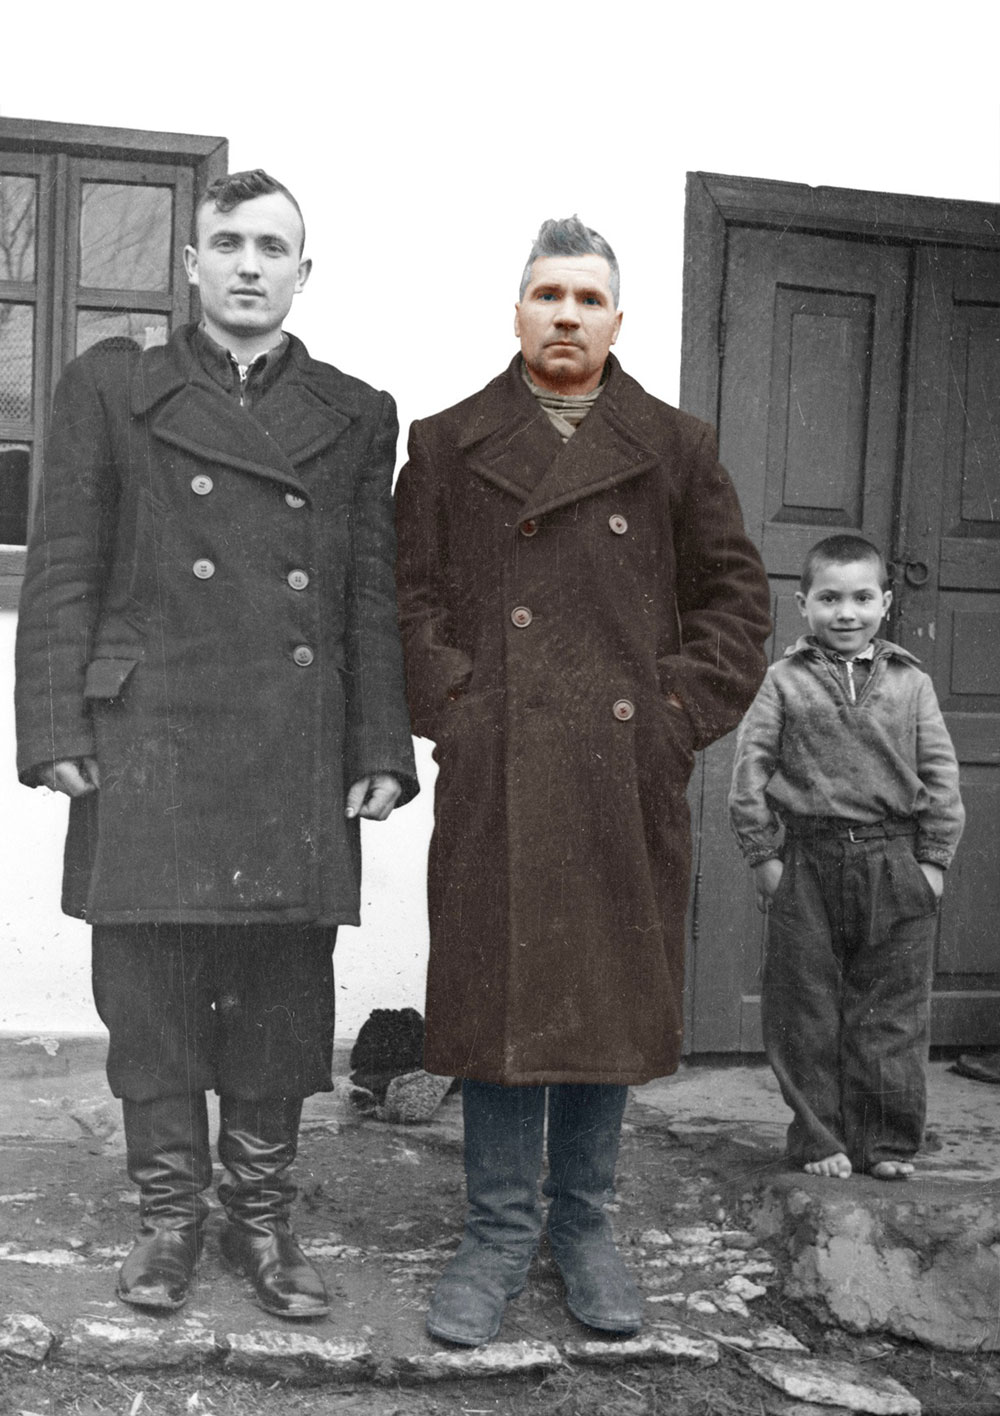 Zaharia Cușnir is pictured in the middle, next to his son and son-in-law in 1956. Image coloured by Lică Sainciuc